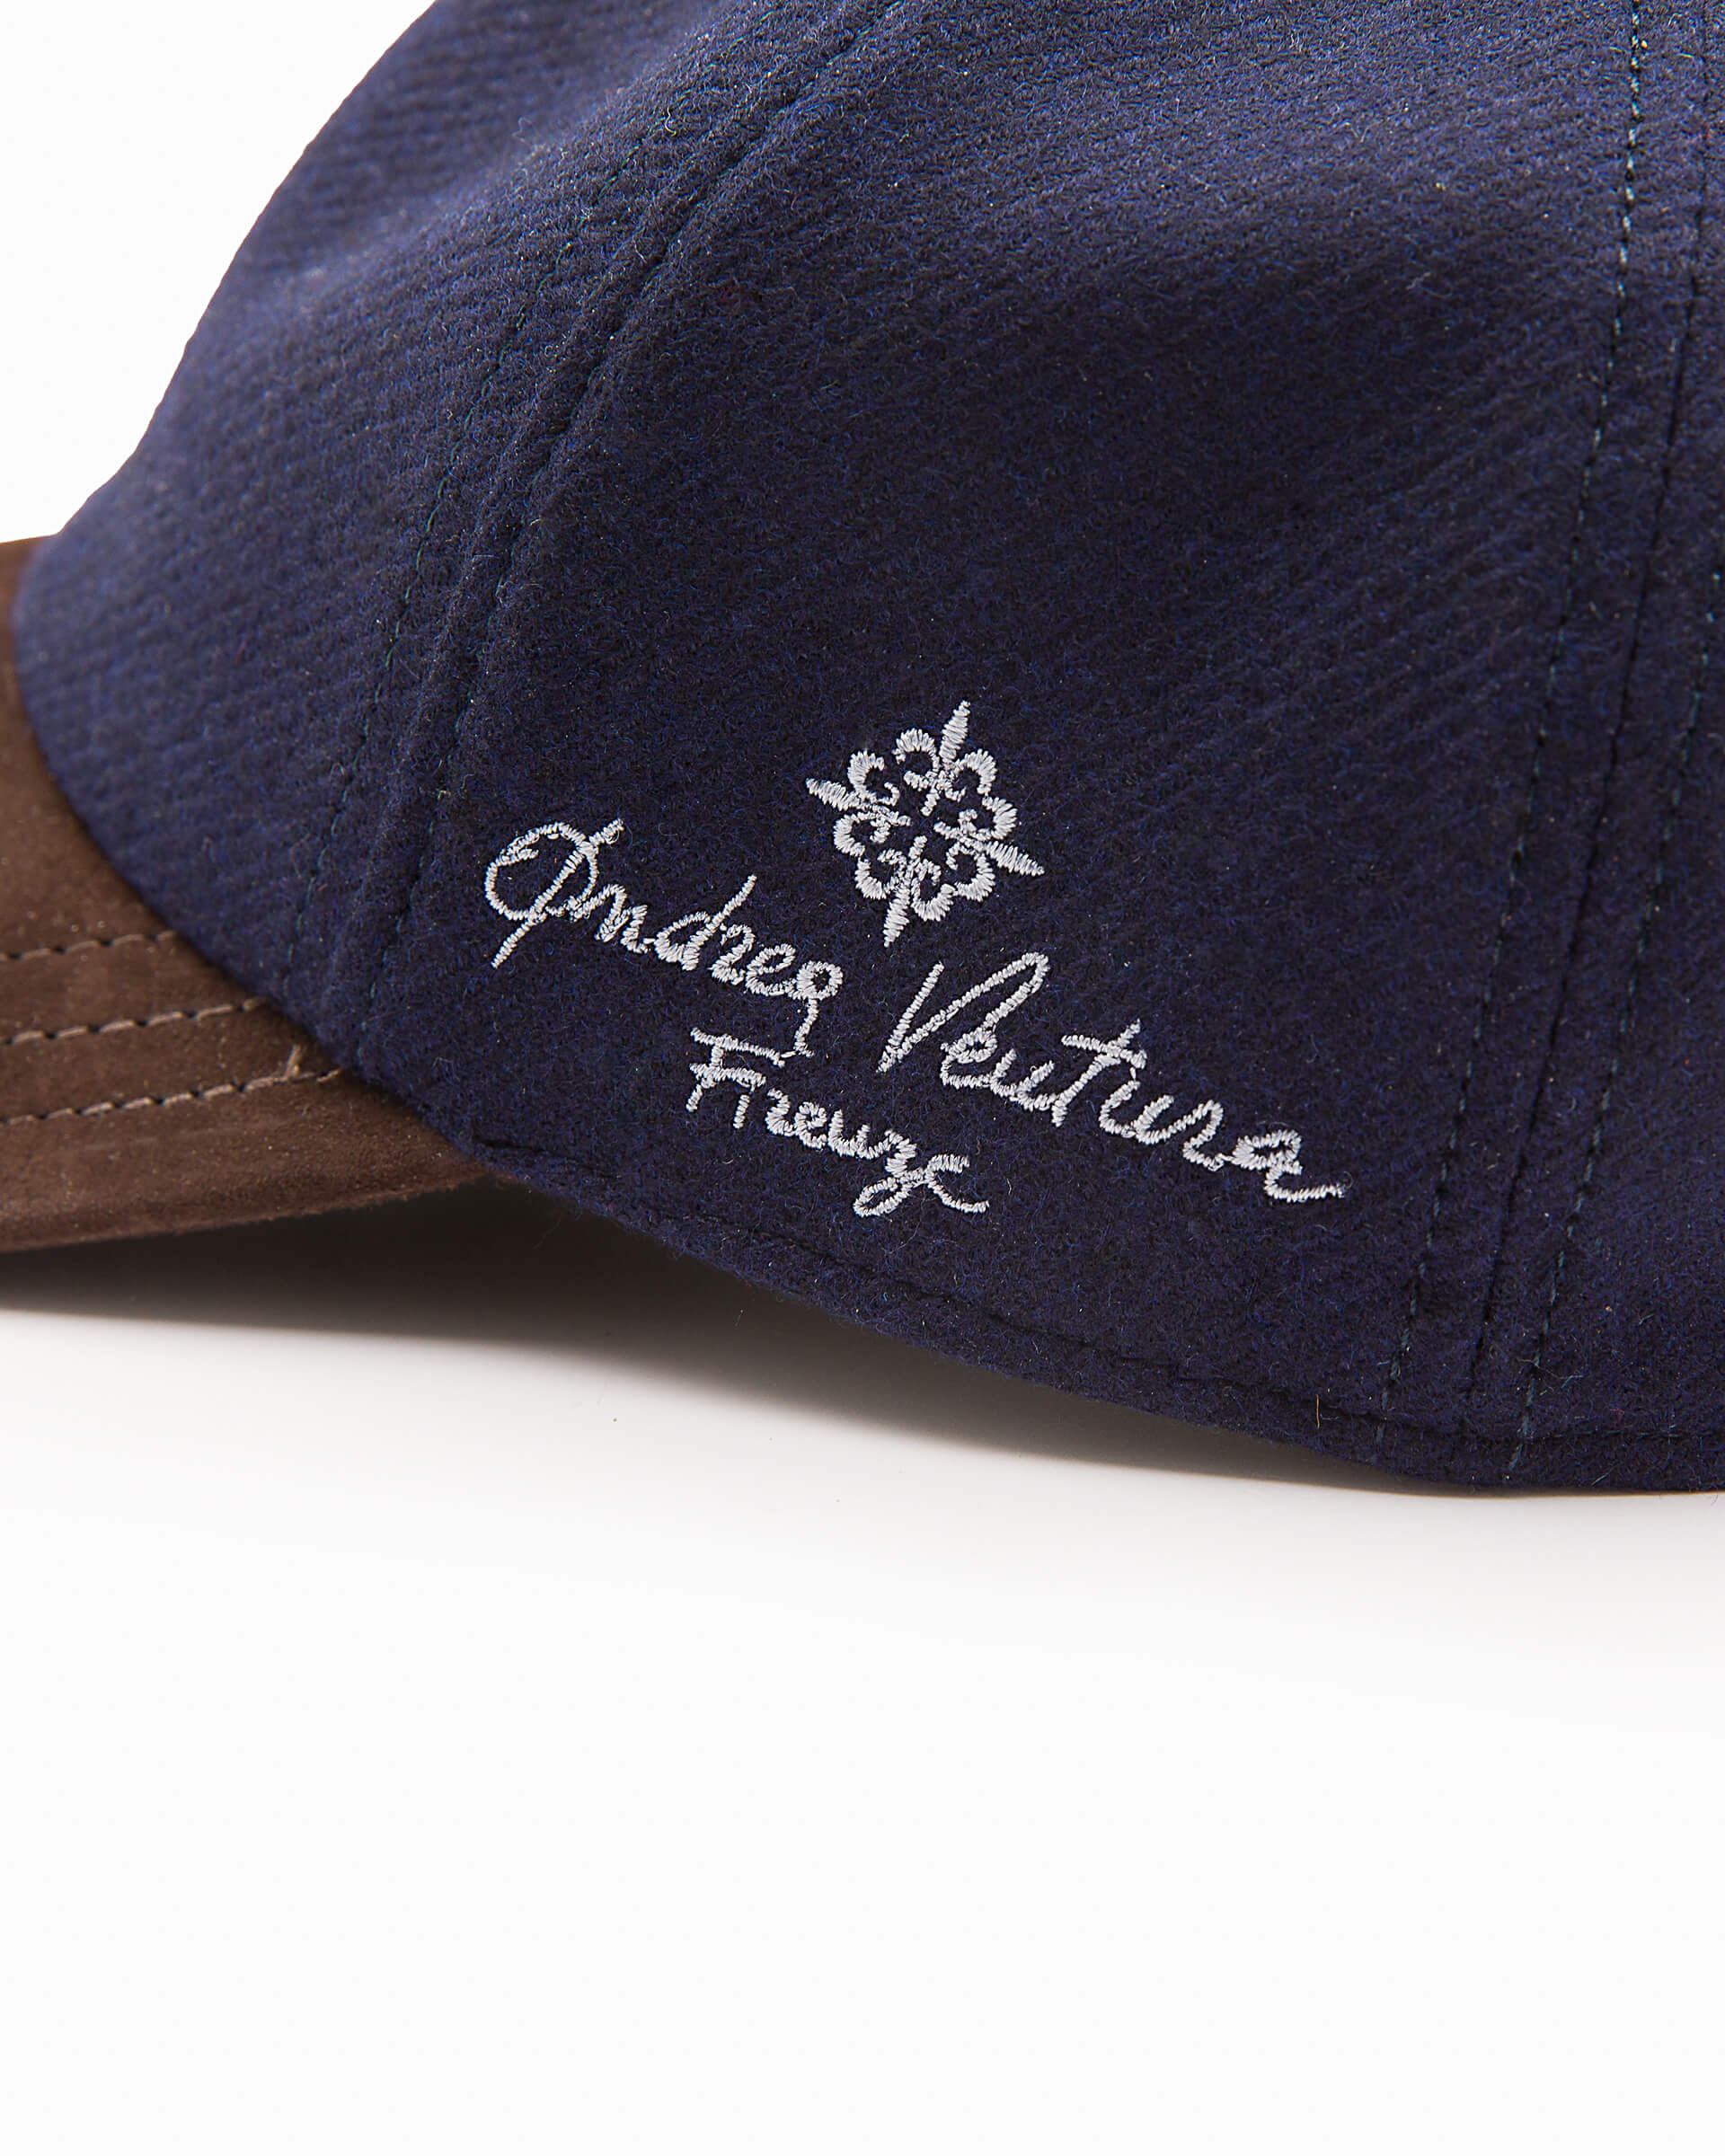 Baseball cap made of cashmere blue visor water-repellent hat Firenze eclipse with - Ventura Andrea